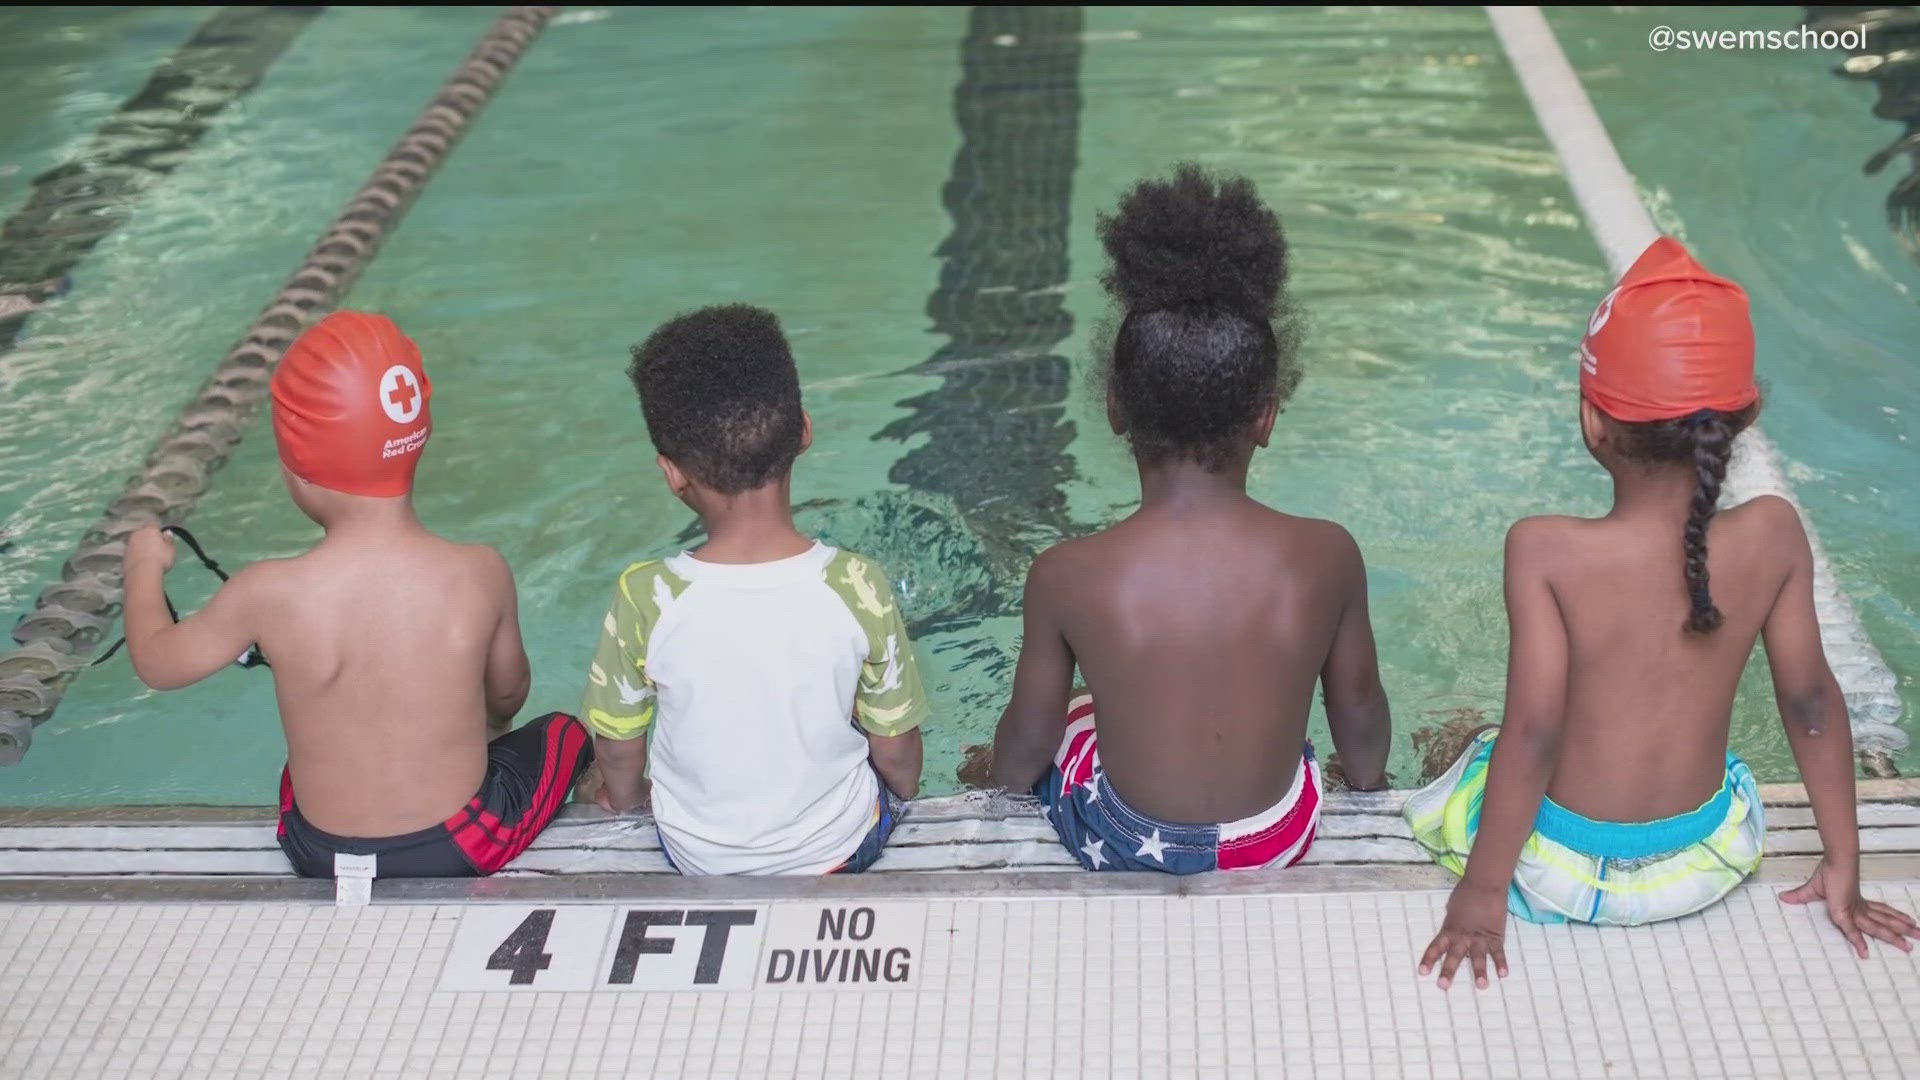 USA Swimming Foundation reports 64% of Black children don't know how to swim. Here's a look at how history played a role and the push to reclaim the freedom to swim.